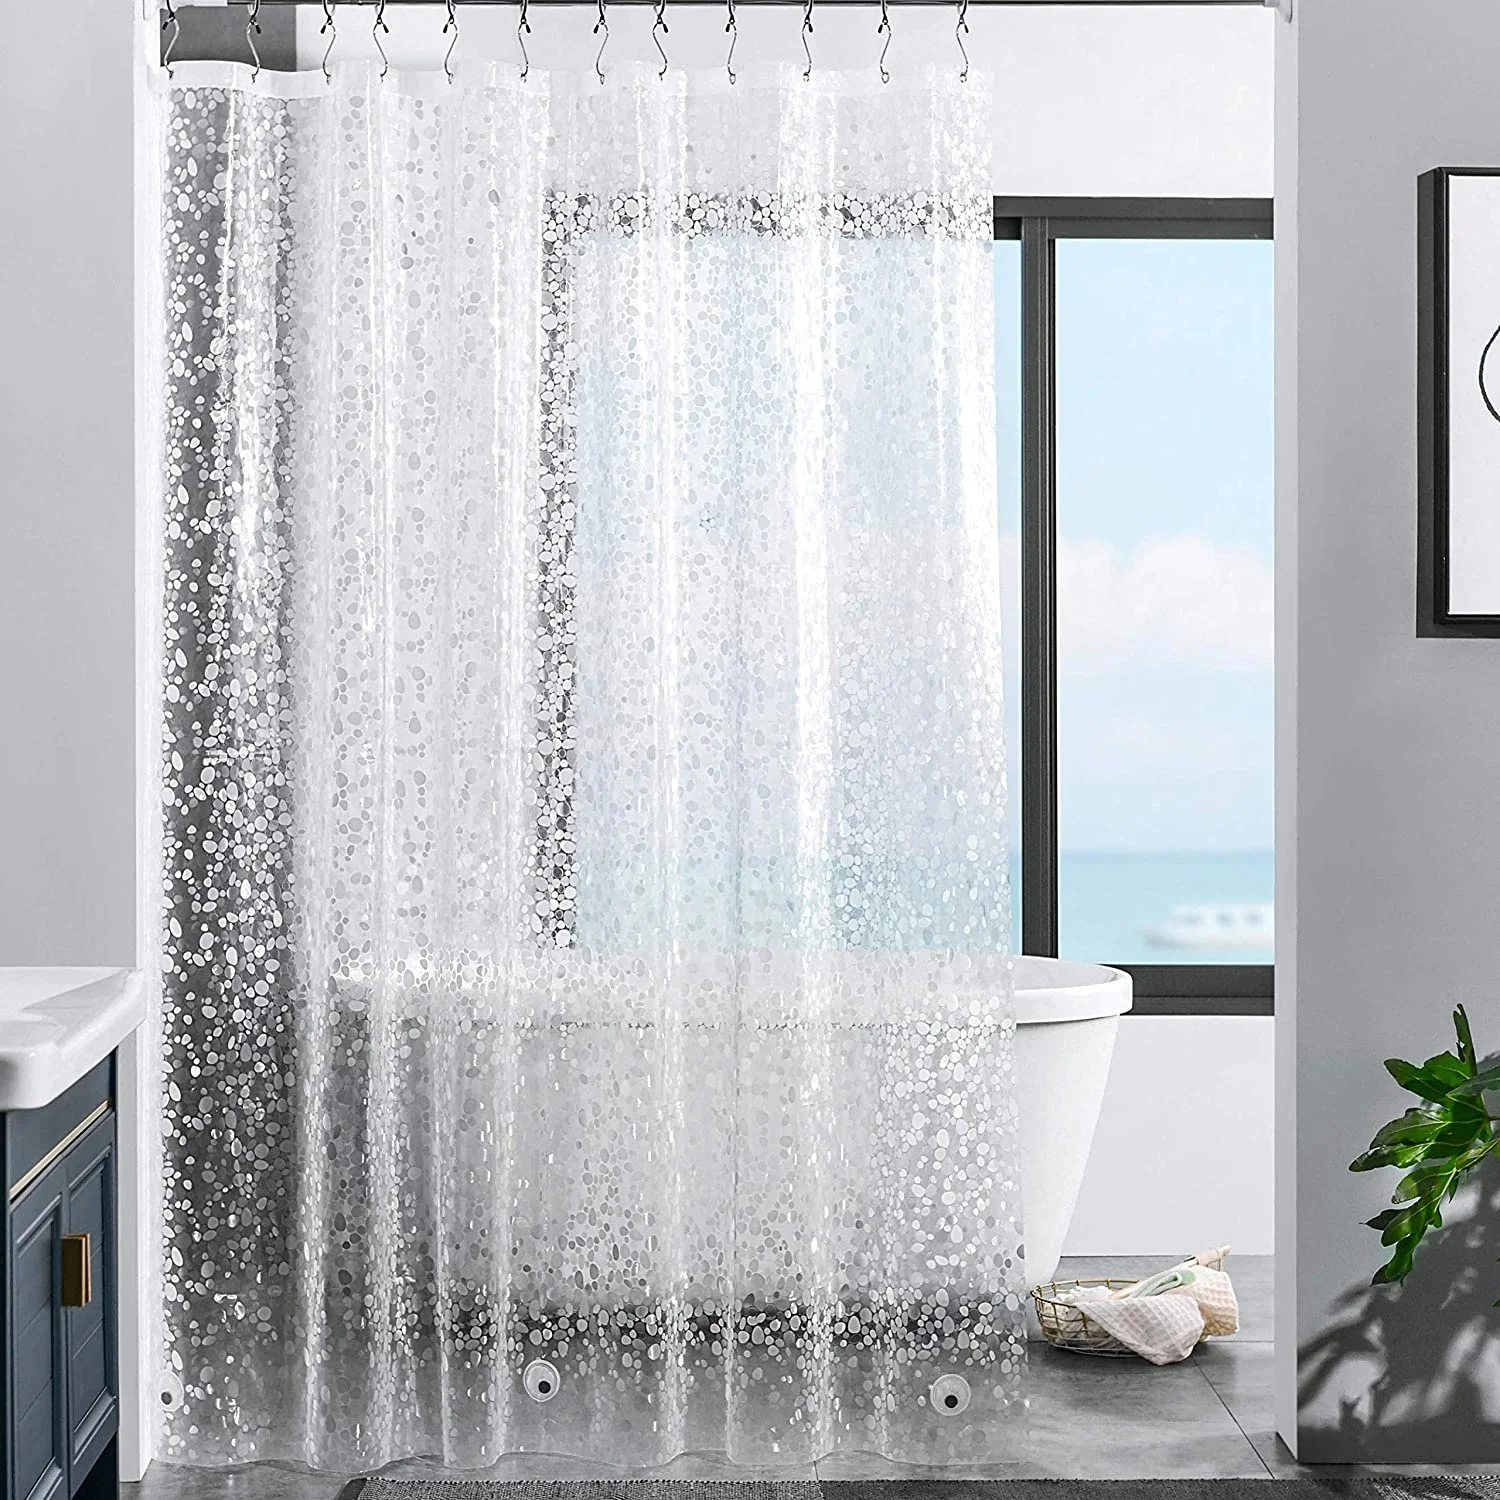 

3D Peva Shower Curtains In Stock 72 X 72 Inches Clear Bathroom Transparent Peva Bath Shower Curtain Waterproof hot sale, White